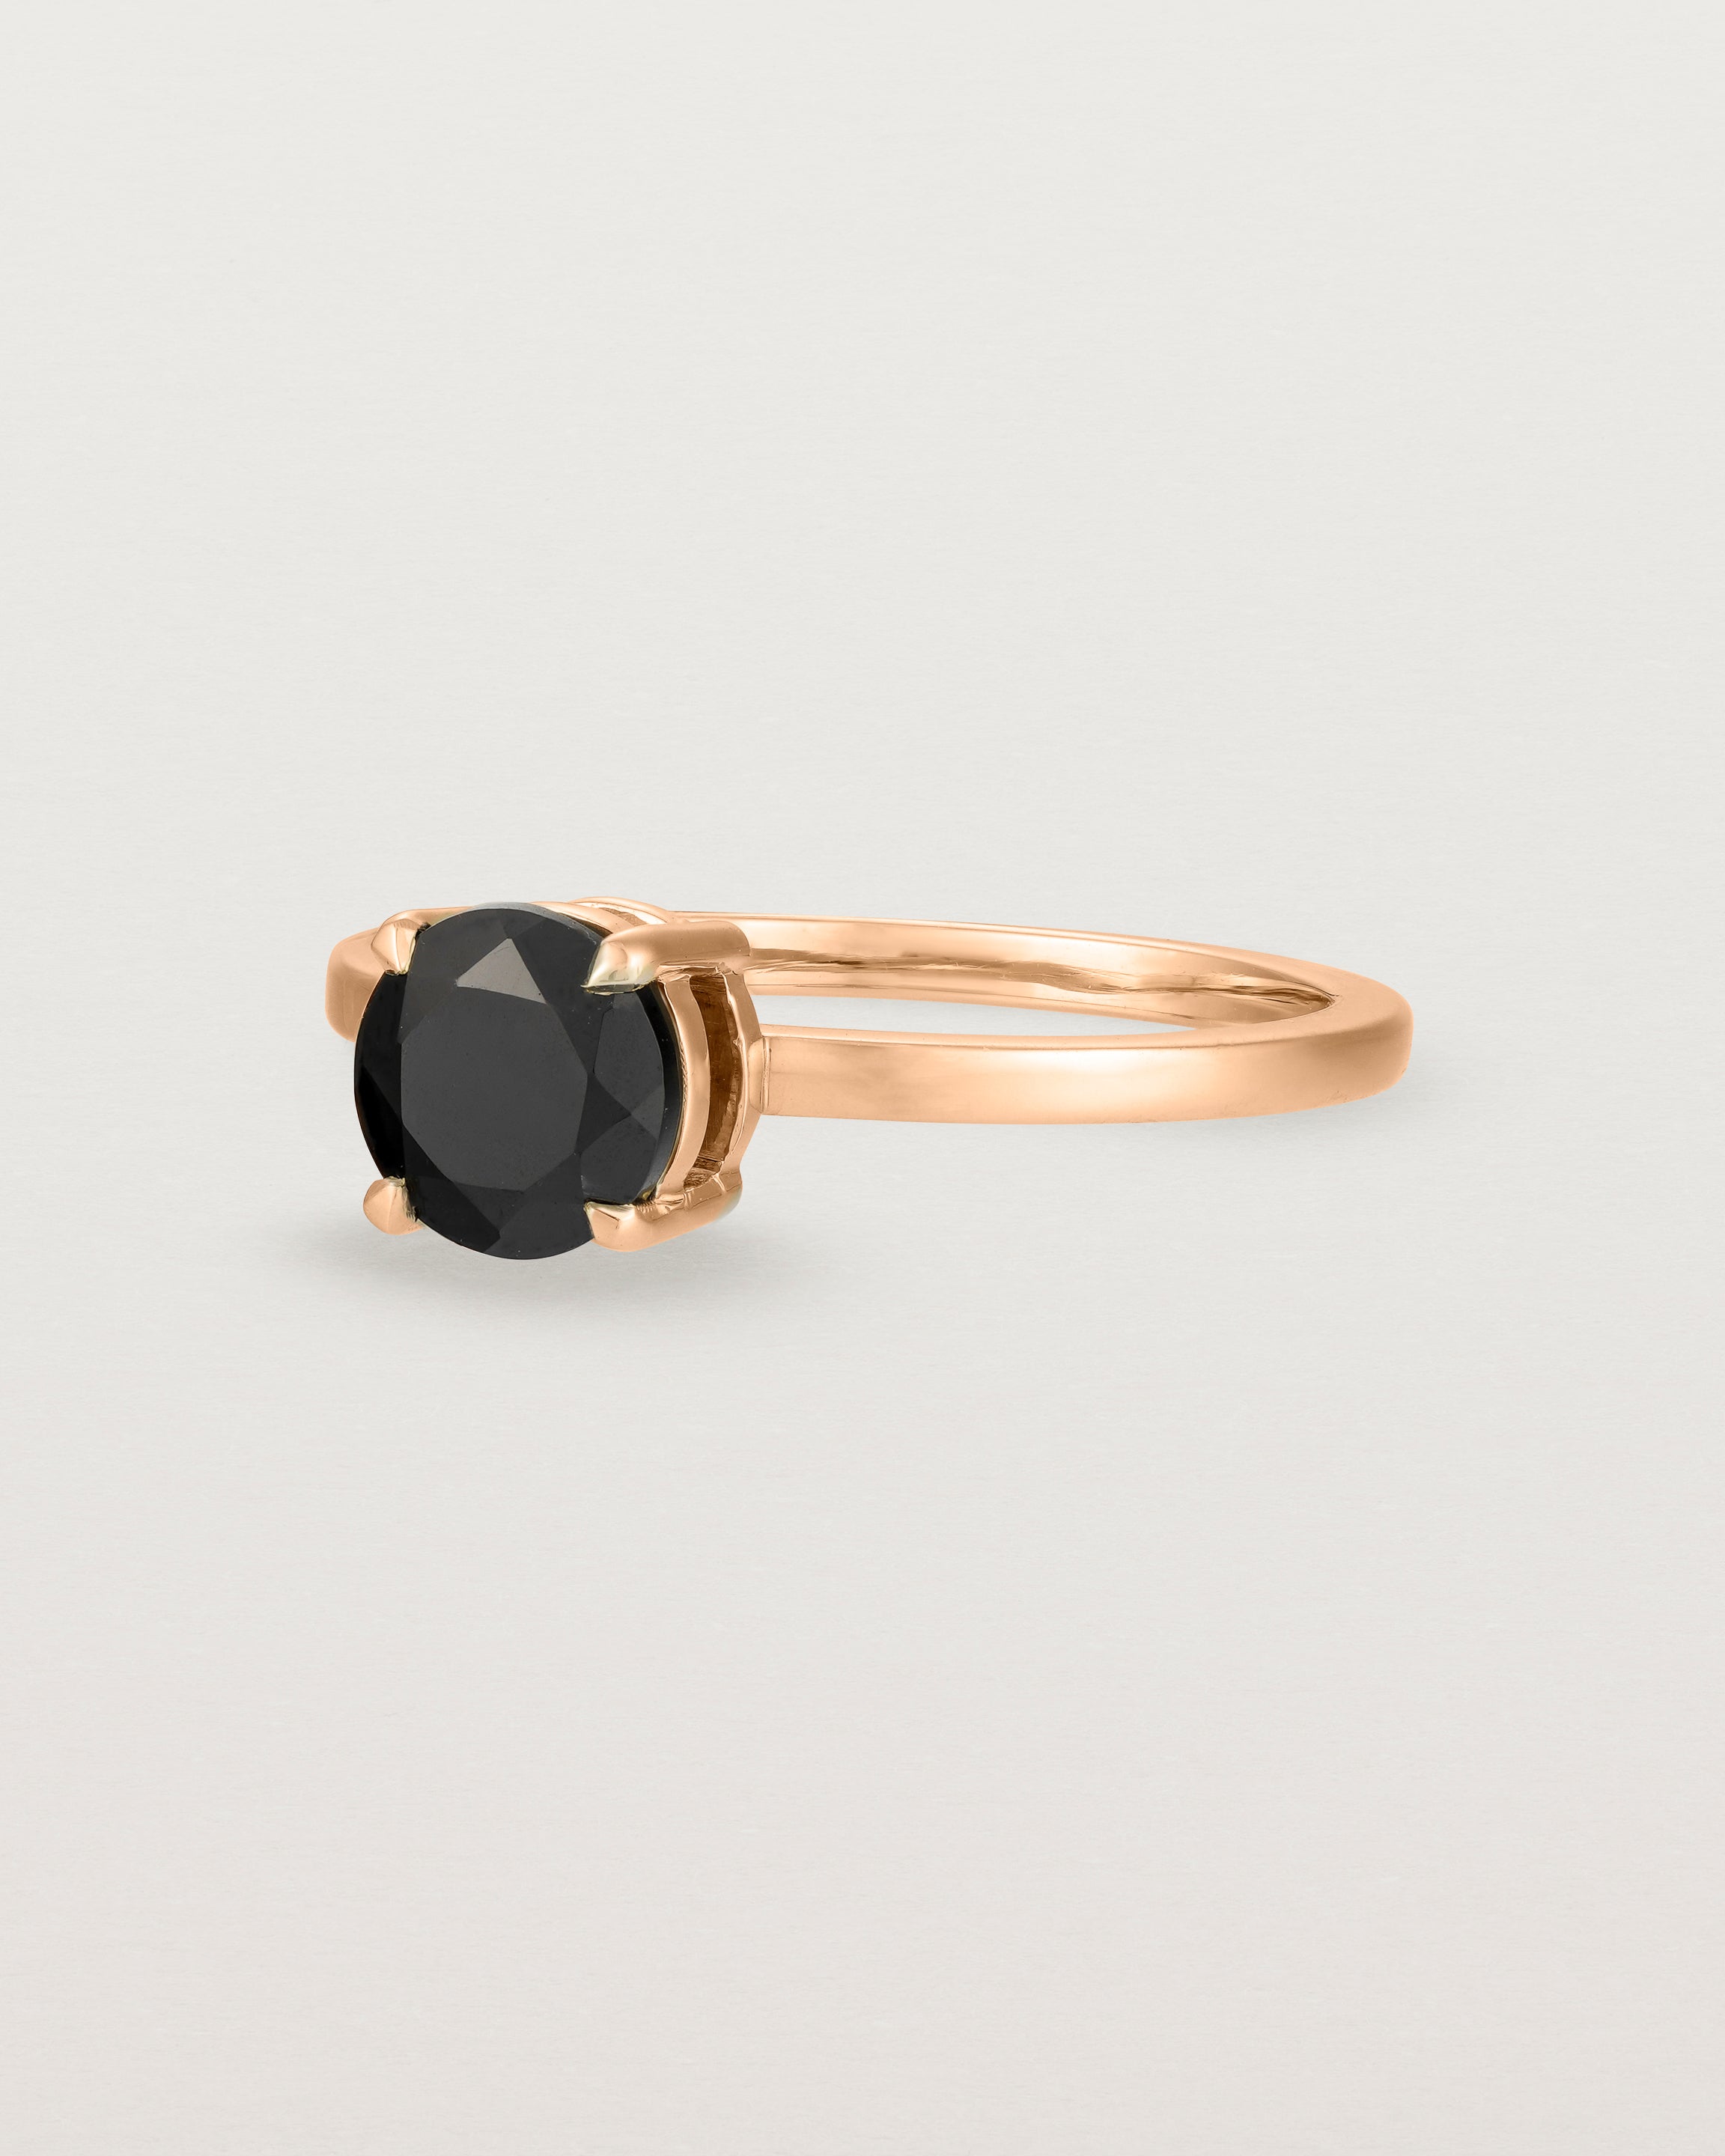 Angled view of the Petite Una Round Solitaire | Black Spinel | Rose Gold.